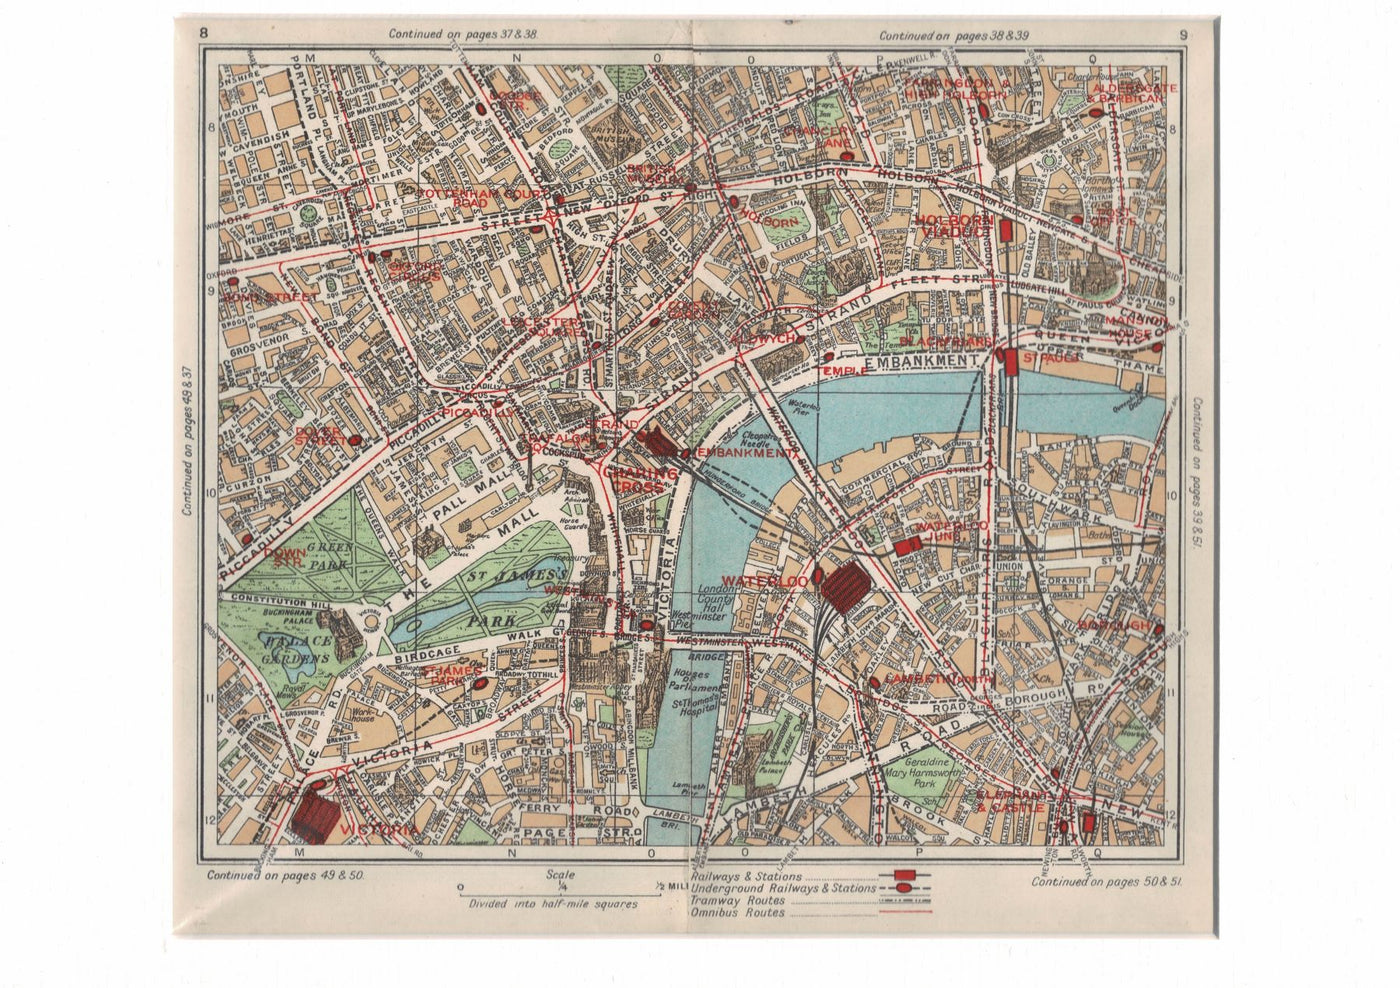 Central London antique map published by Geographia Ltd in 1926